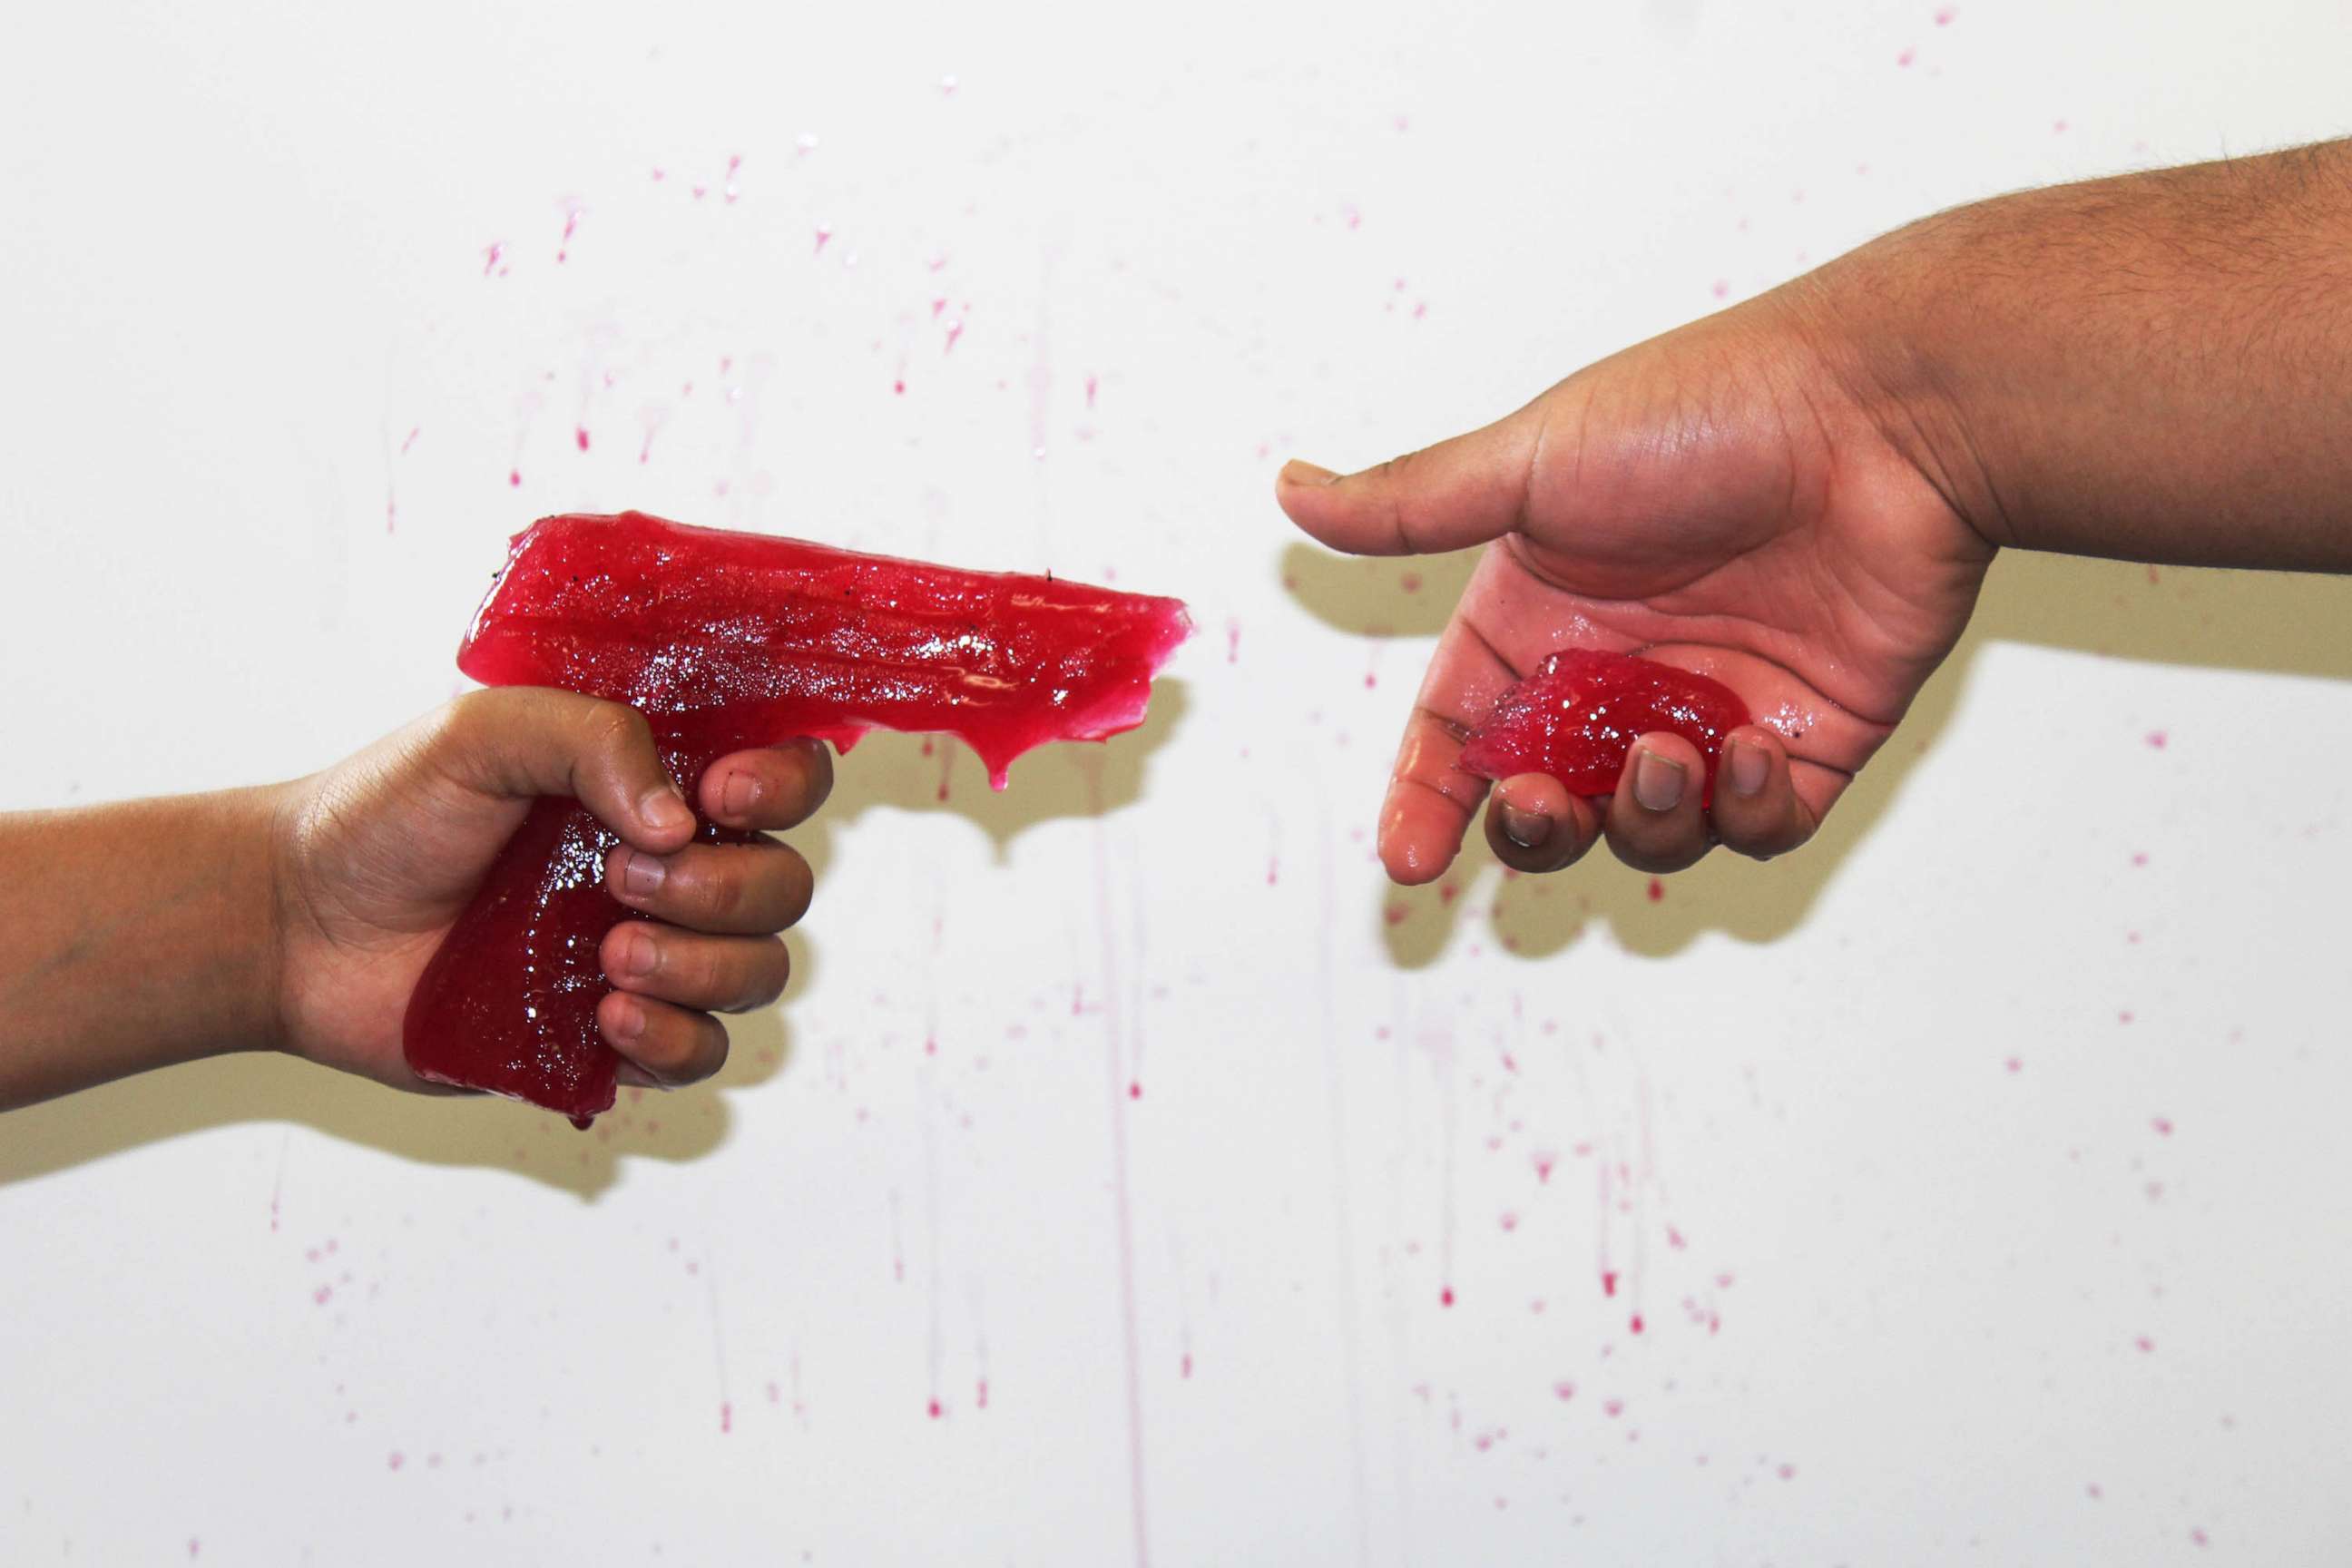 PHOTO: Artists created this image using a red-colored ice sculpture made from the mold of a disabled gun.